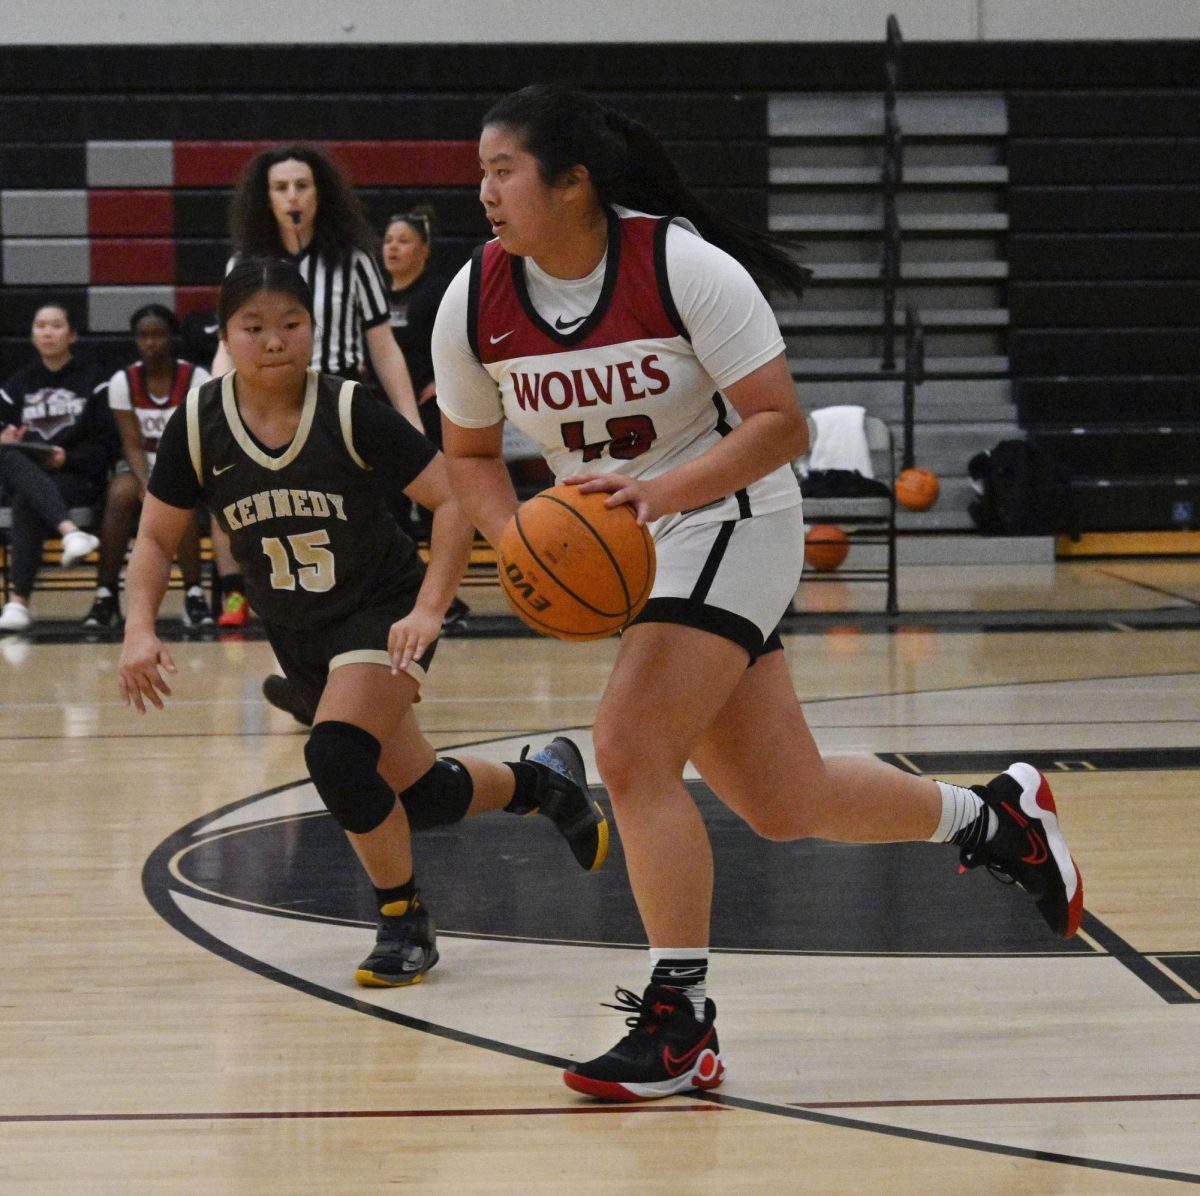 Cara Decathong (#22) protects the ball from the opposing teams player.